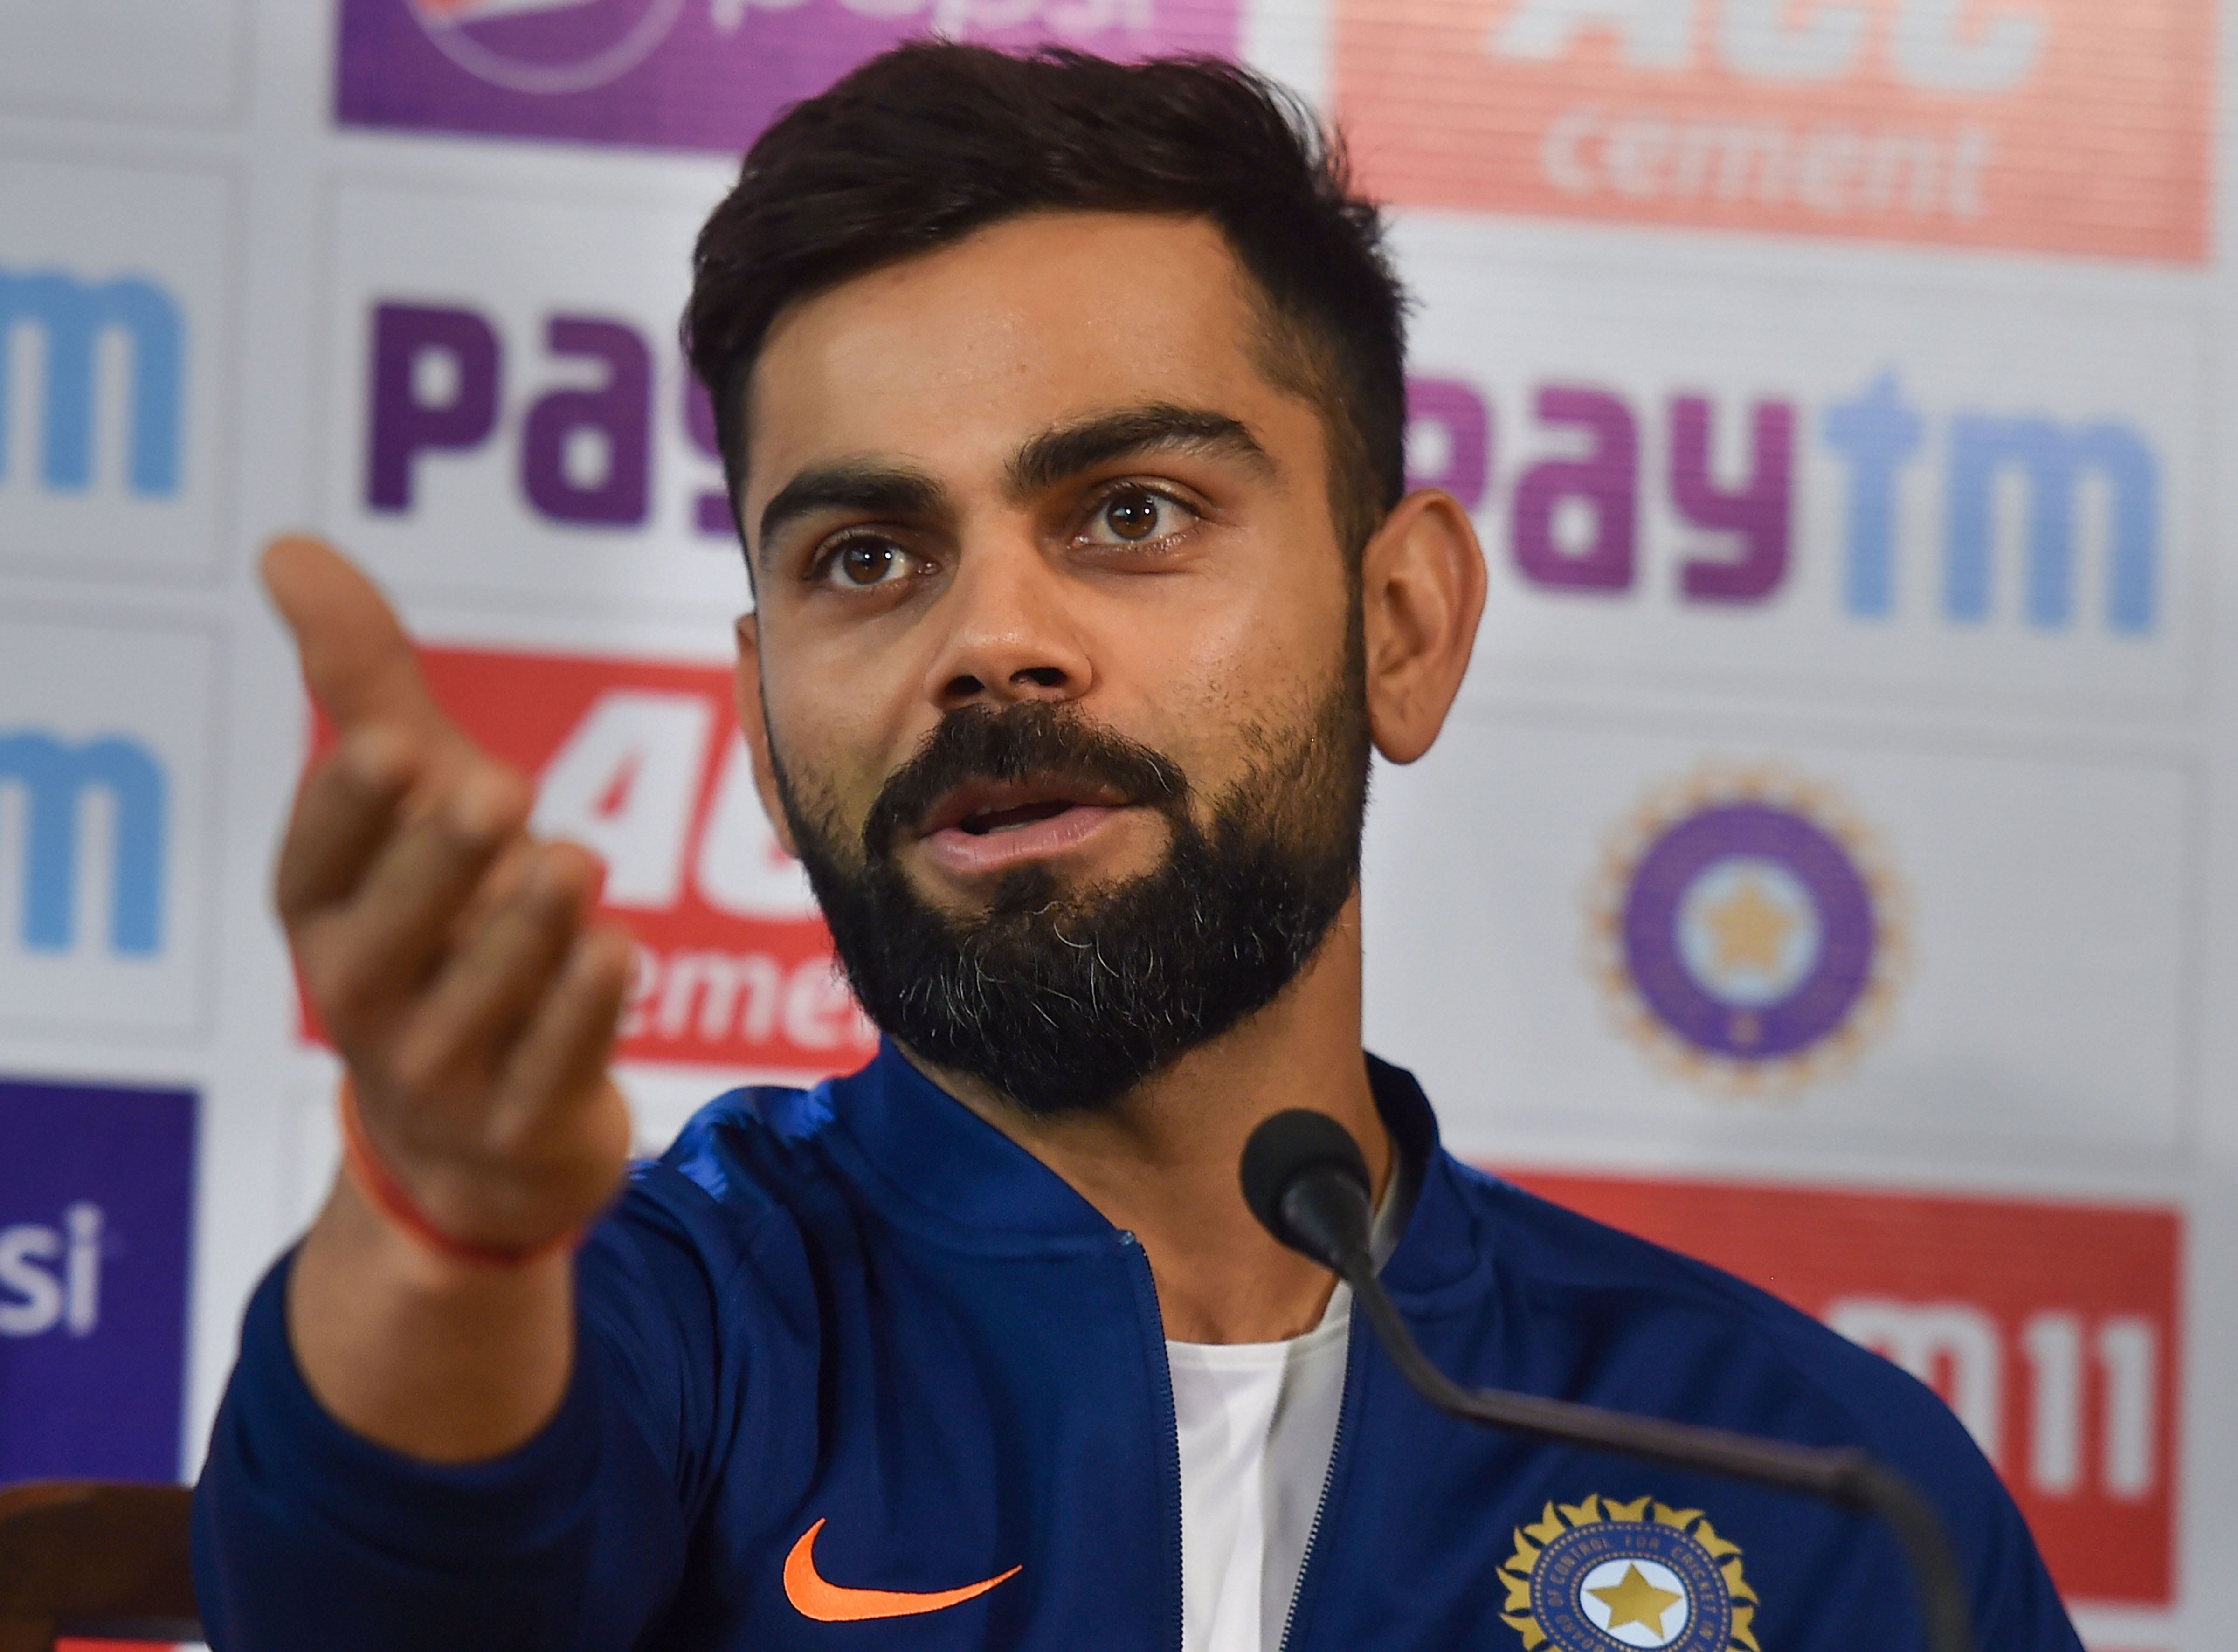 Indian captain Virat Kohli addresses a press conference on the eve of the 1st pink-ball day/night cricket test match against Bangladesh at Eden Garden in Kolkata - PTI